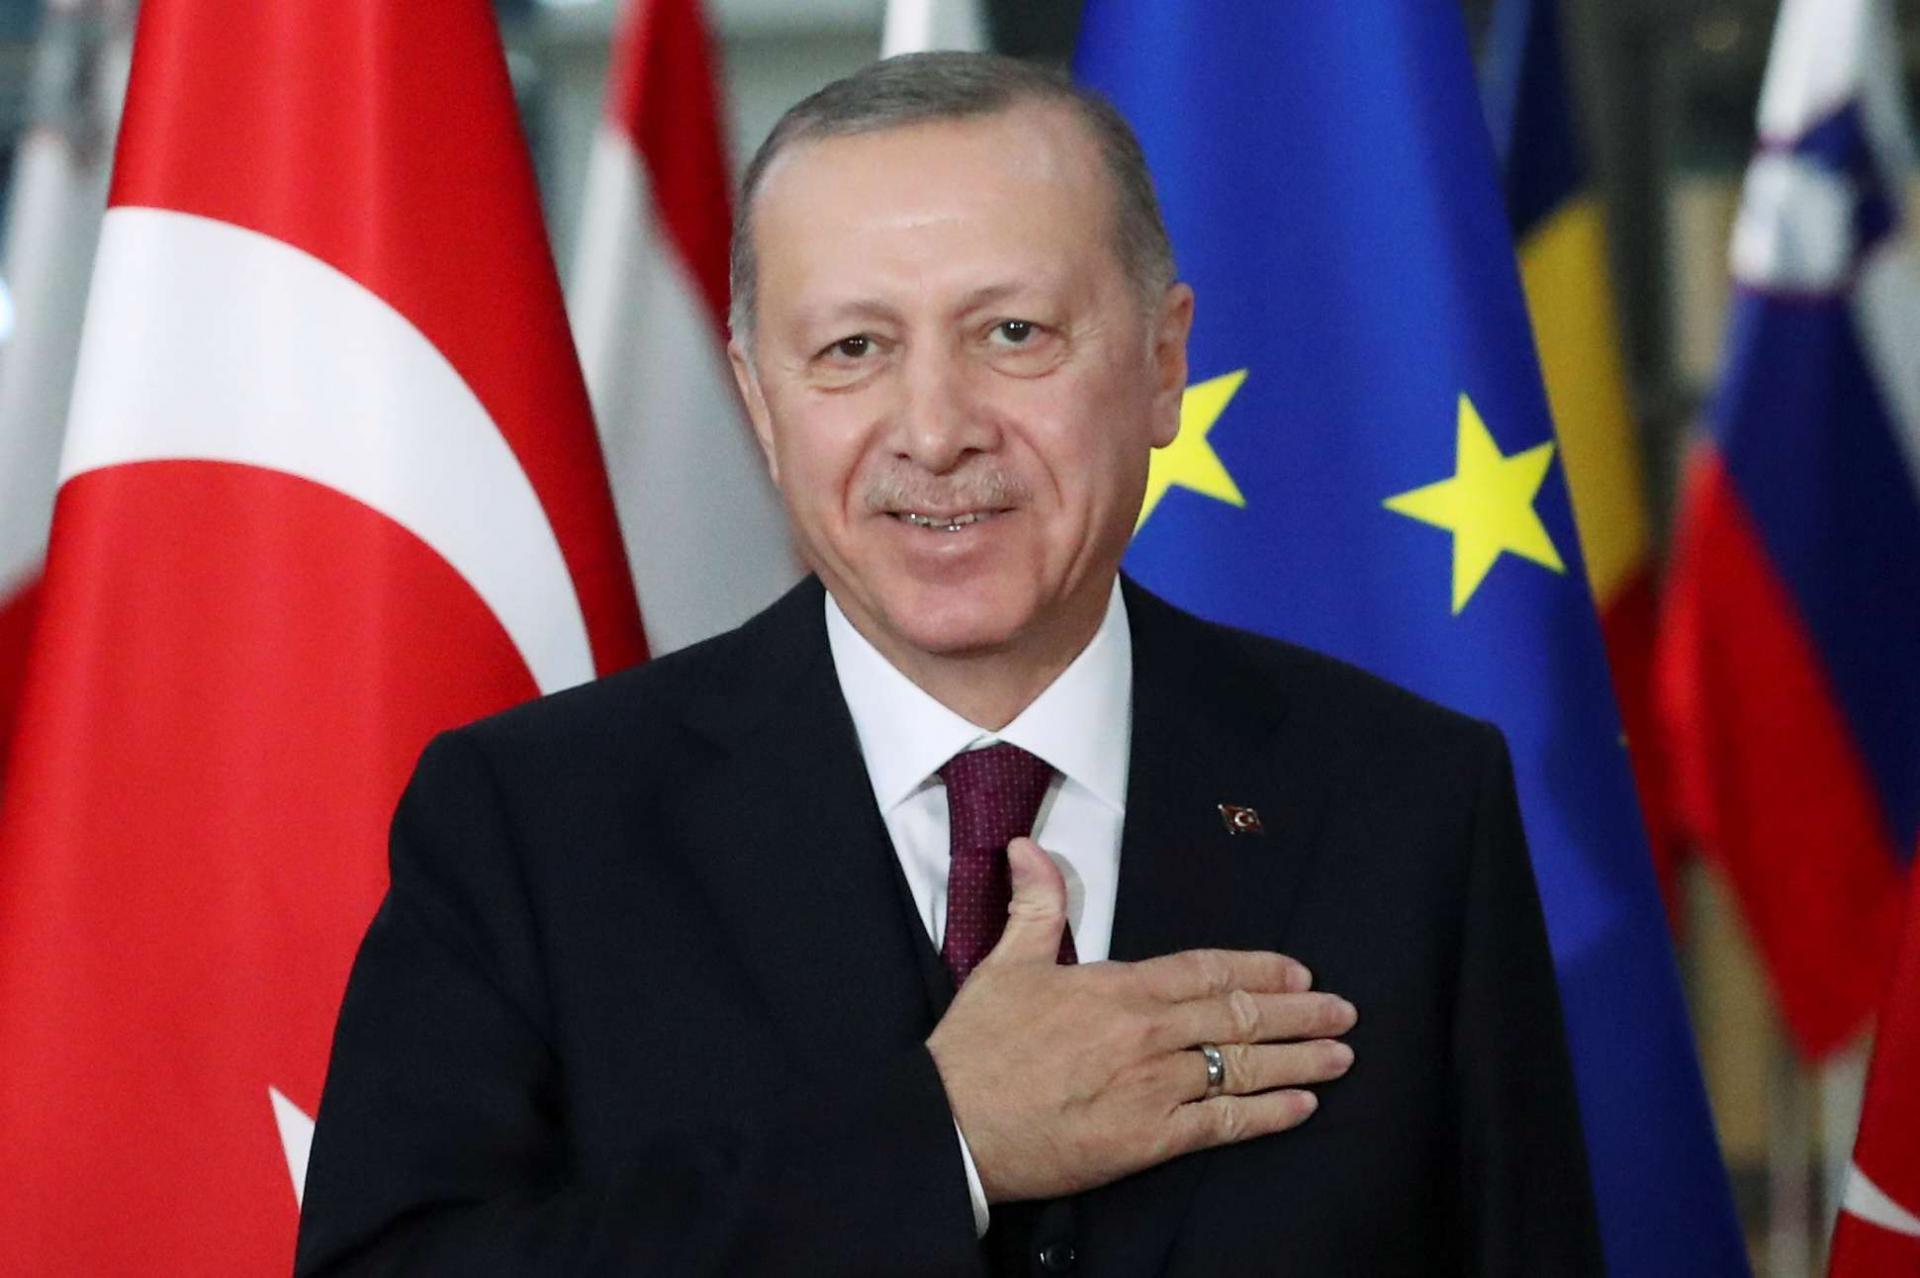 It is also an opportunity to turn the tables for Erdogan